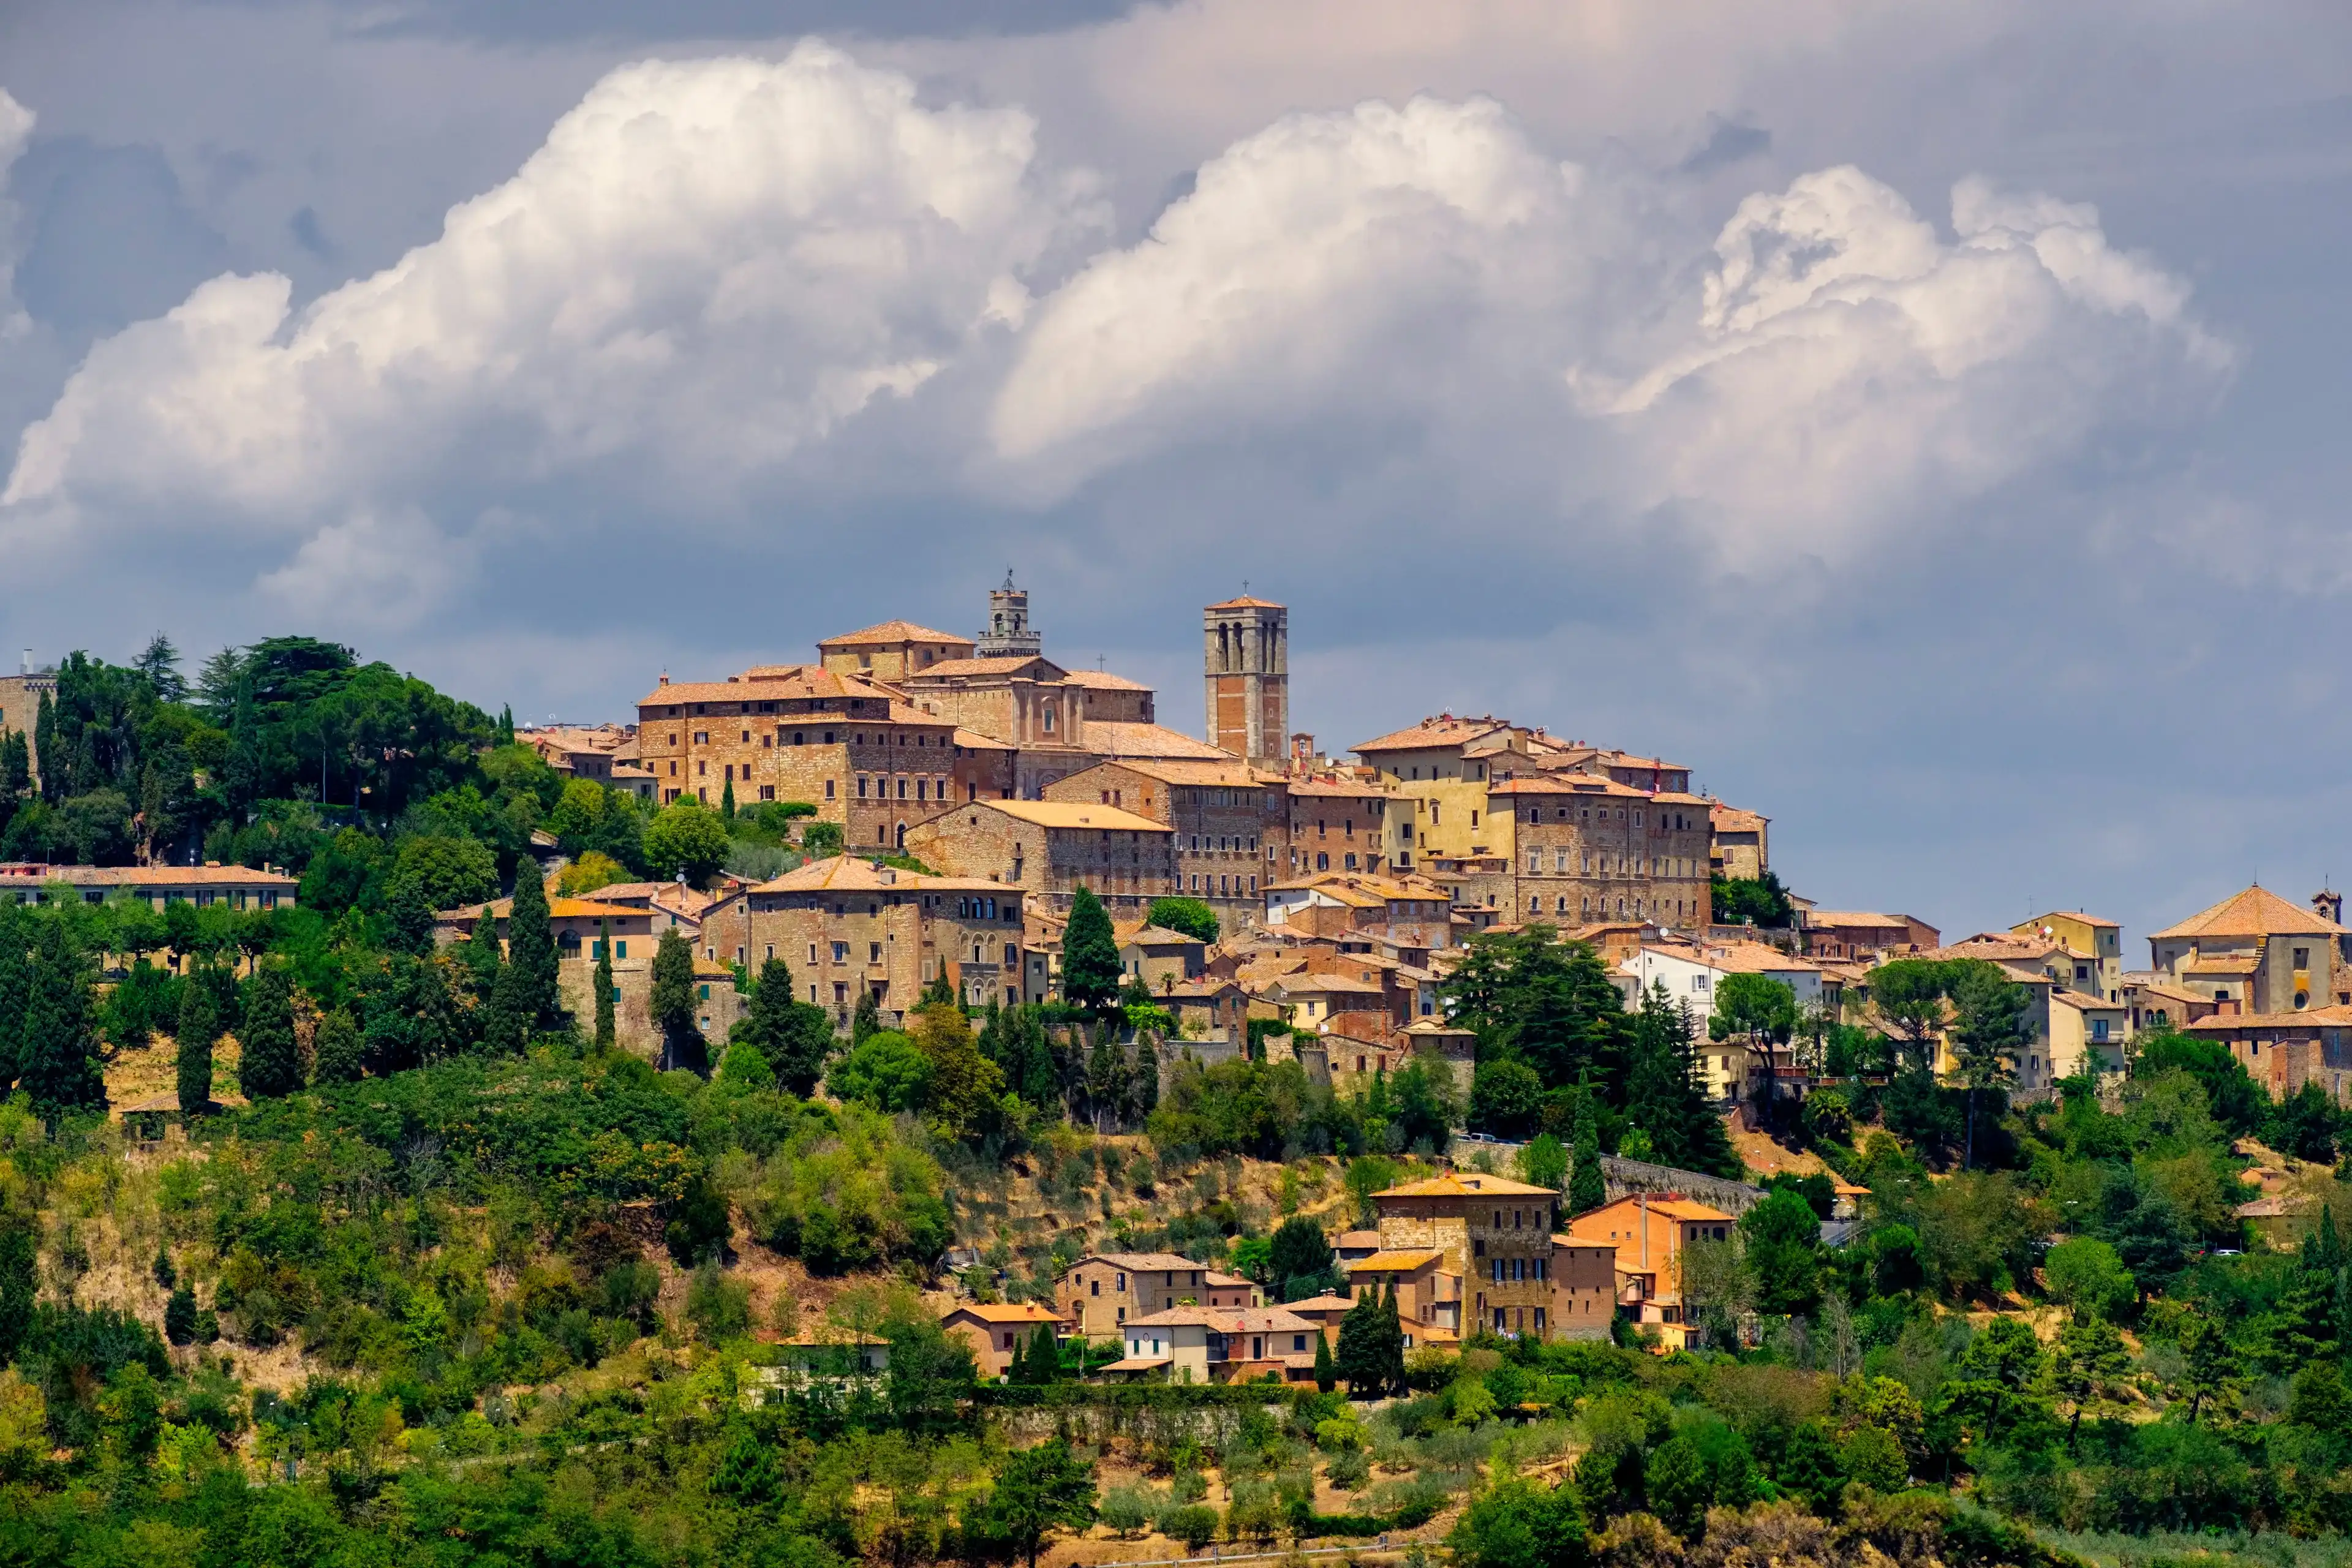 Best Montepulciano hotels. Cheap hotels in Montepulciano, Italy